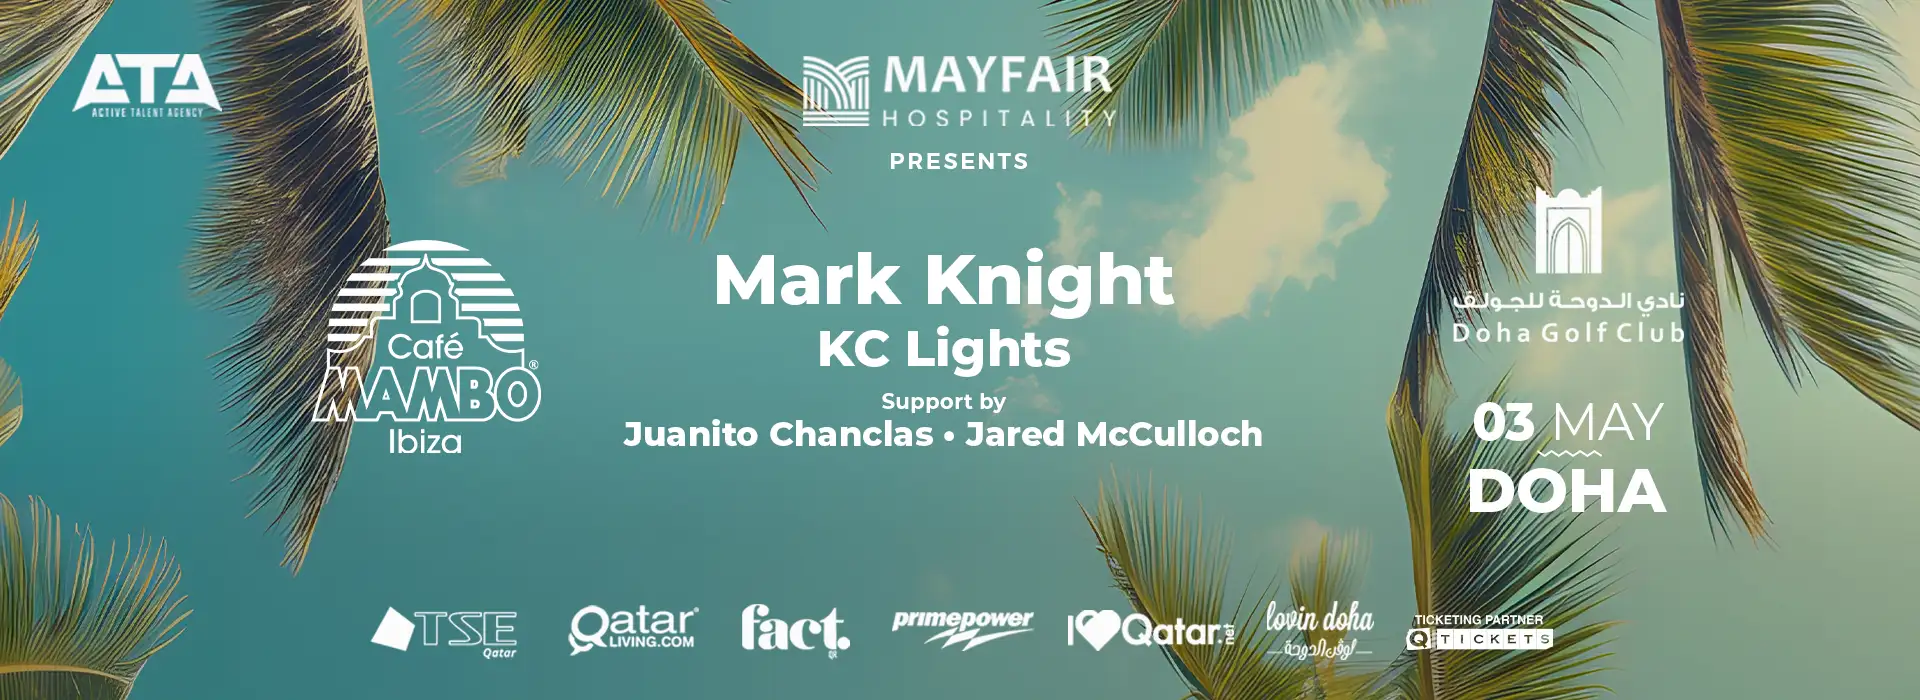 Café Mambo Ibiza featuring the legendary MARK KNIGHT, KC LIGHTS and MORE